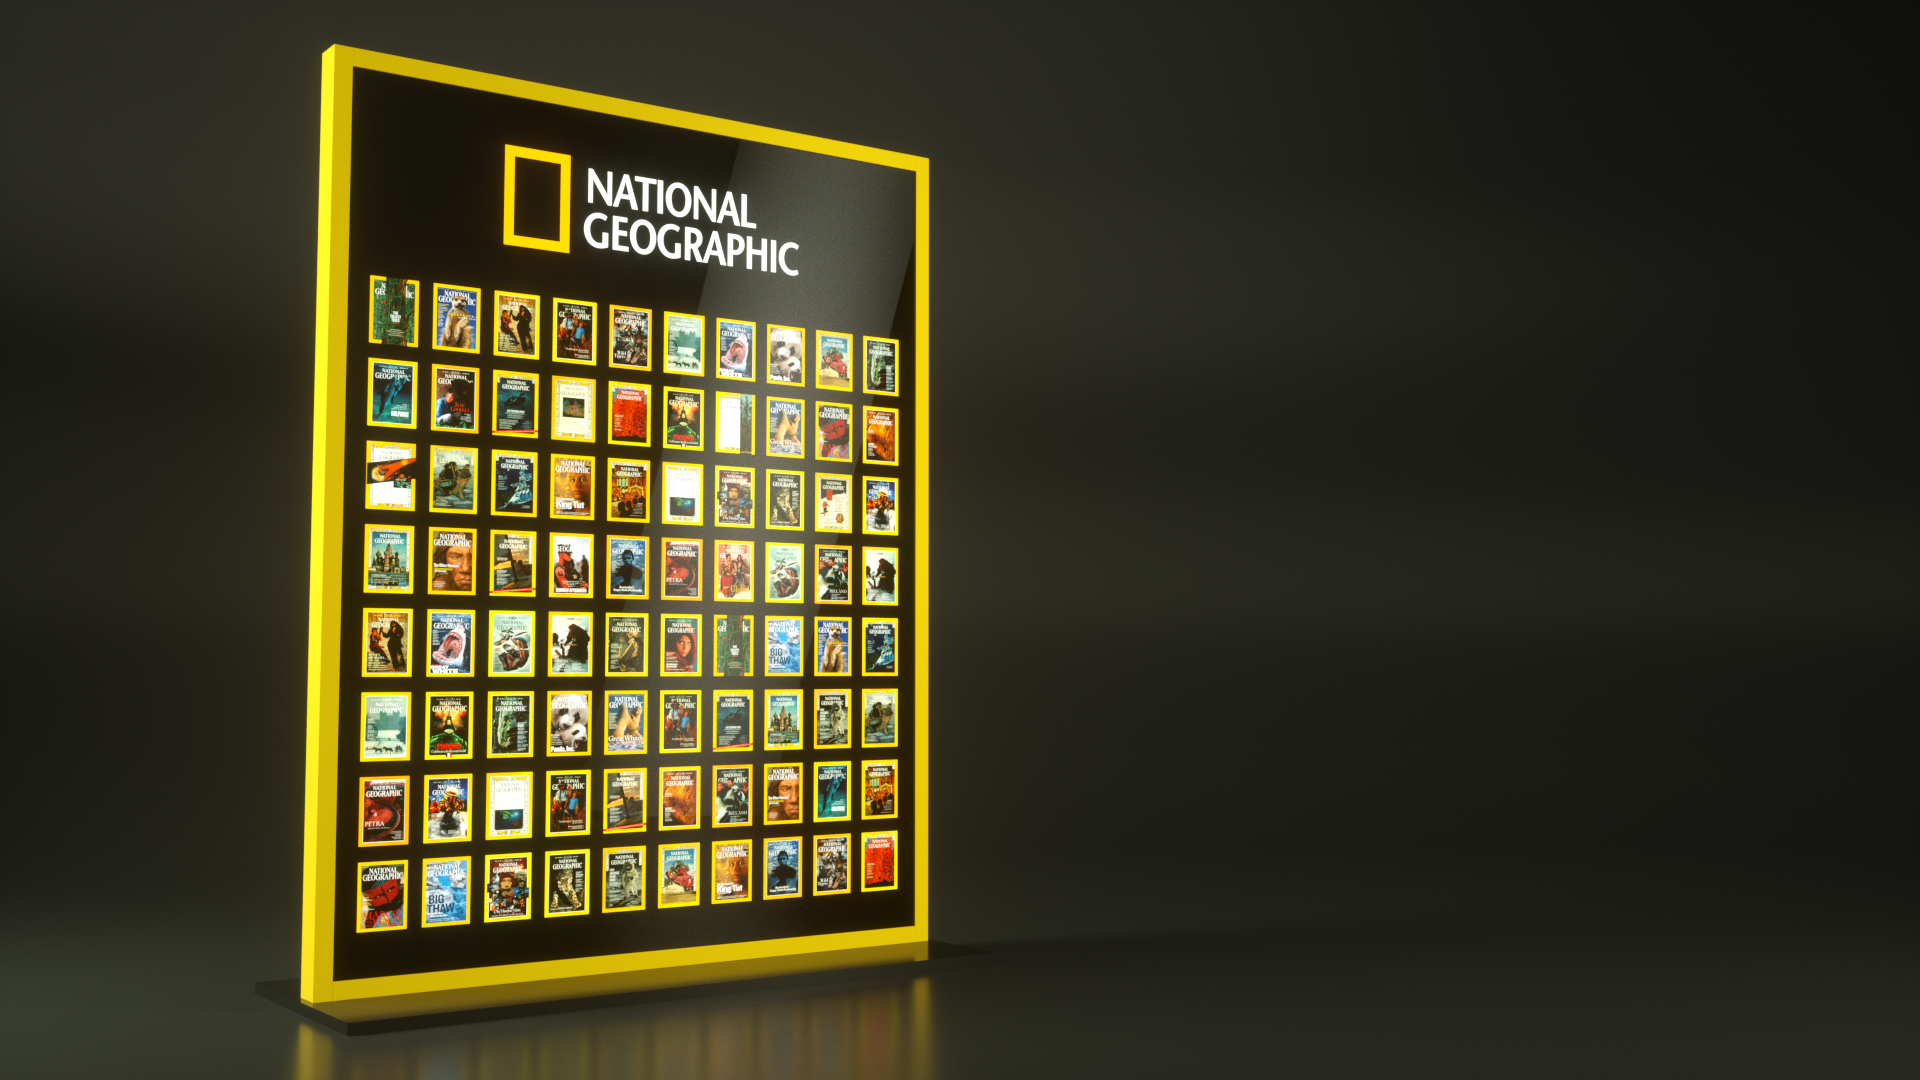 2982 - National Geographic - SHOW Octanorm.jpg